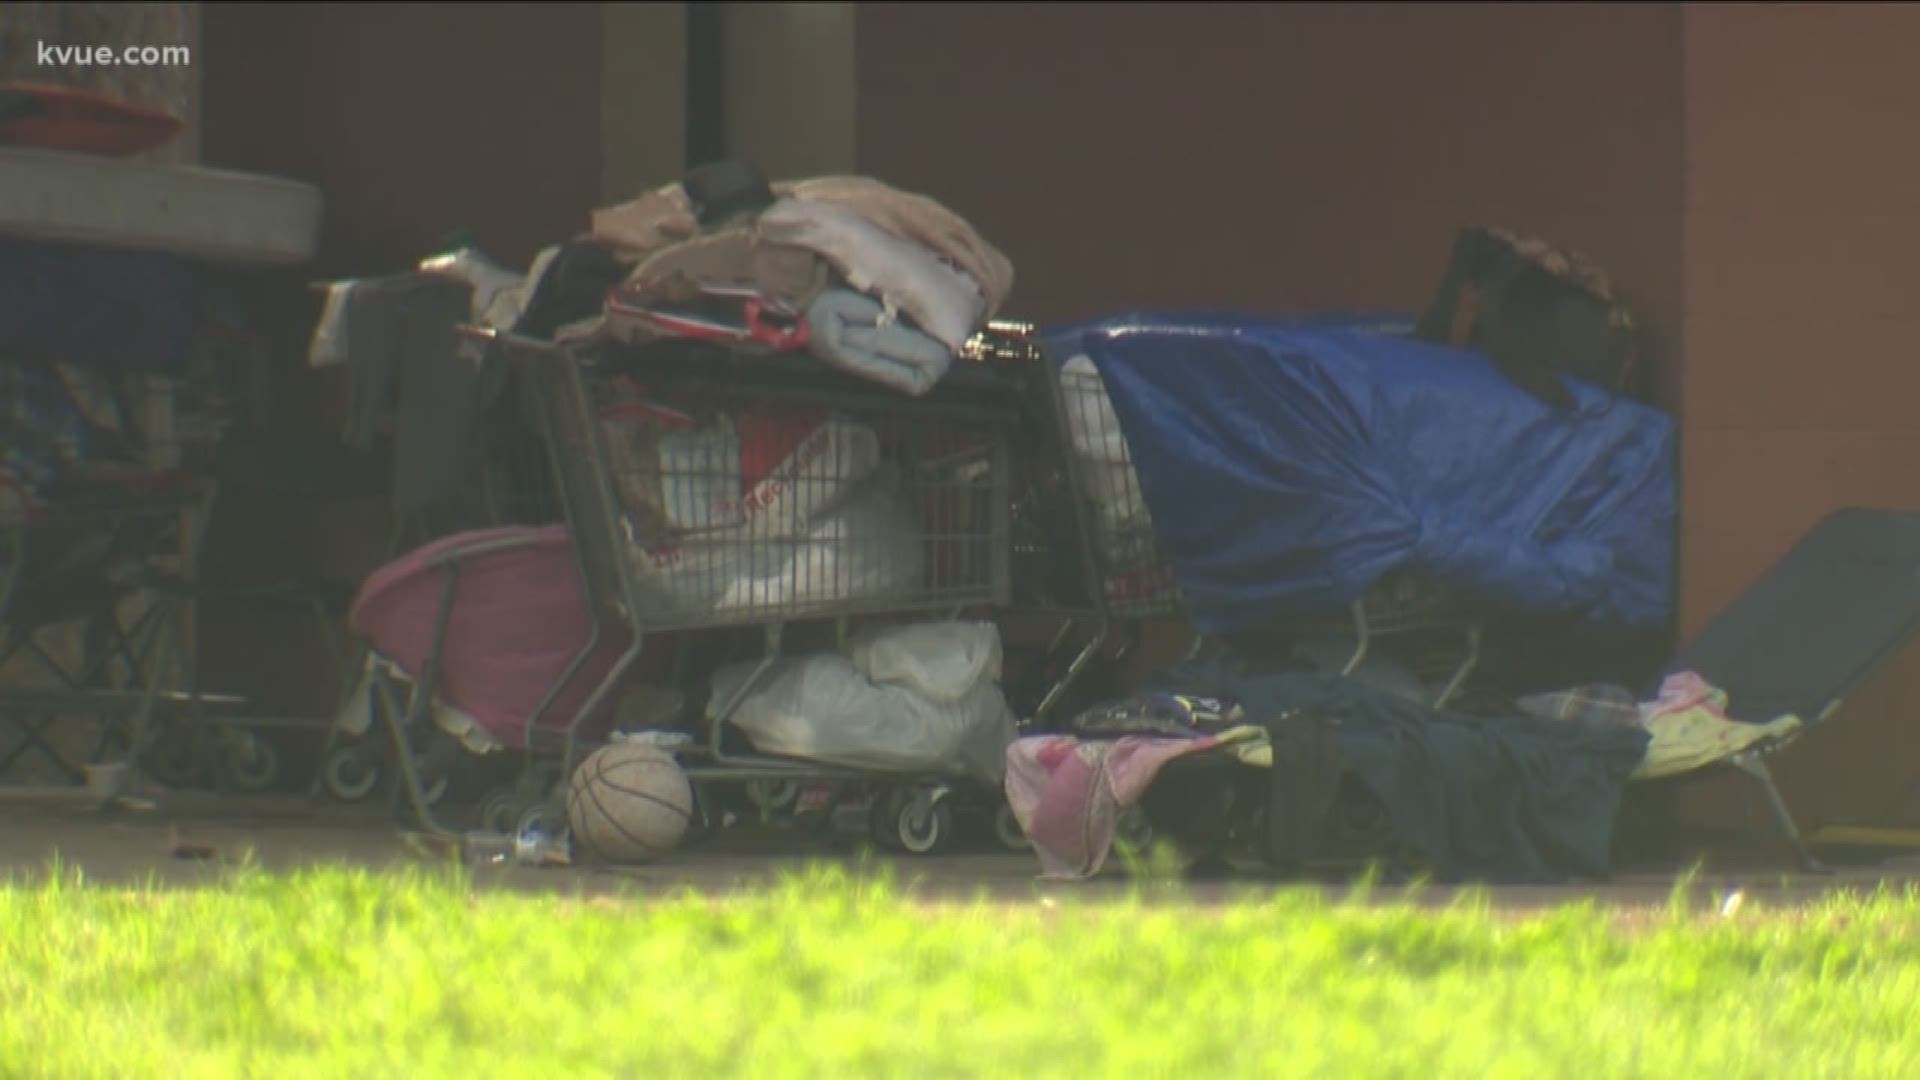 Tents, shopping carts and mattresses have become a common sight at Gillis Park in South Austin.